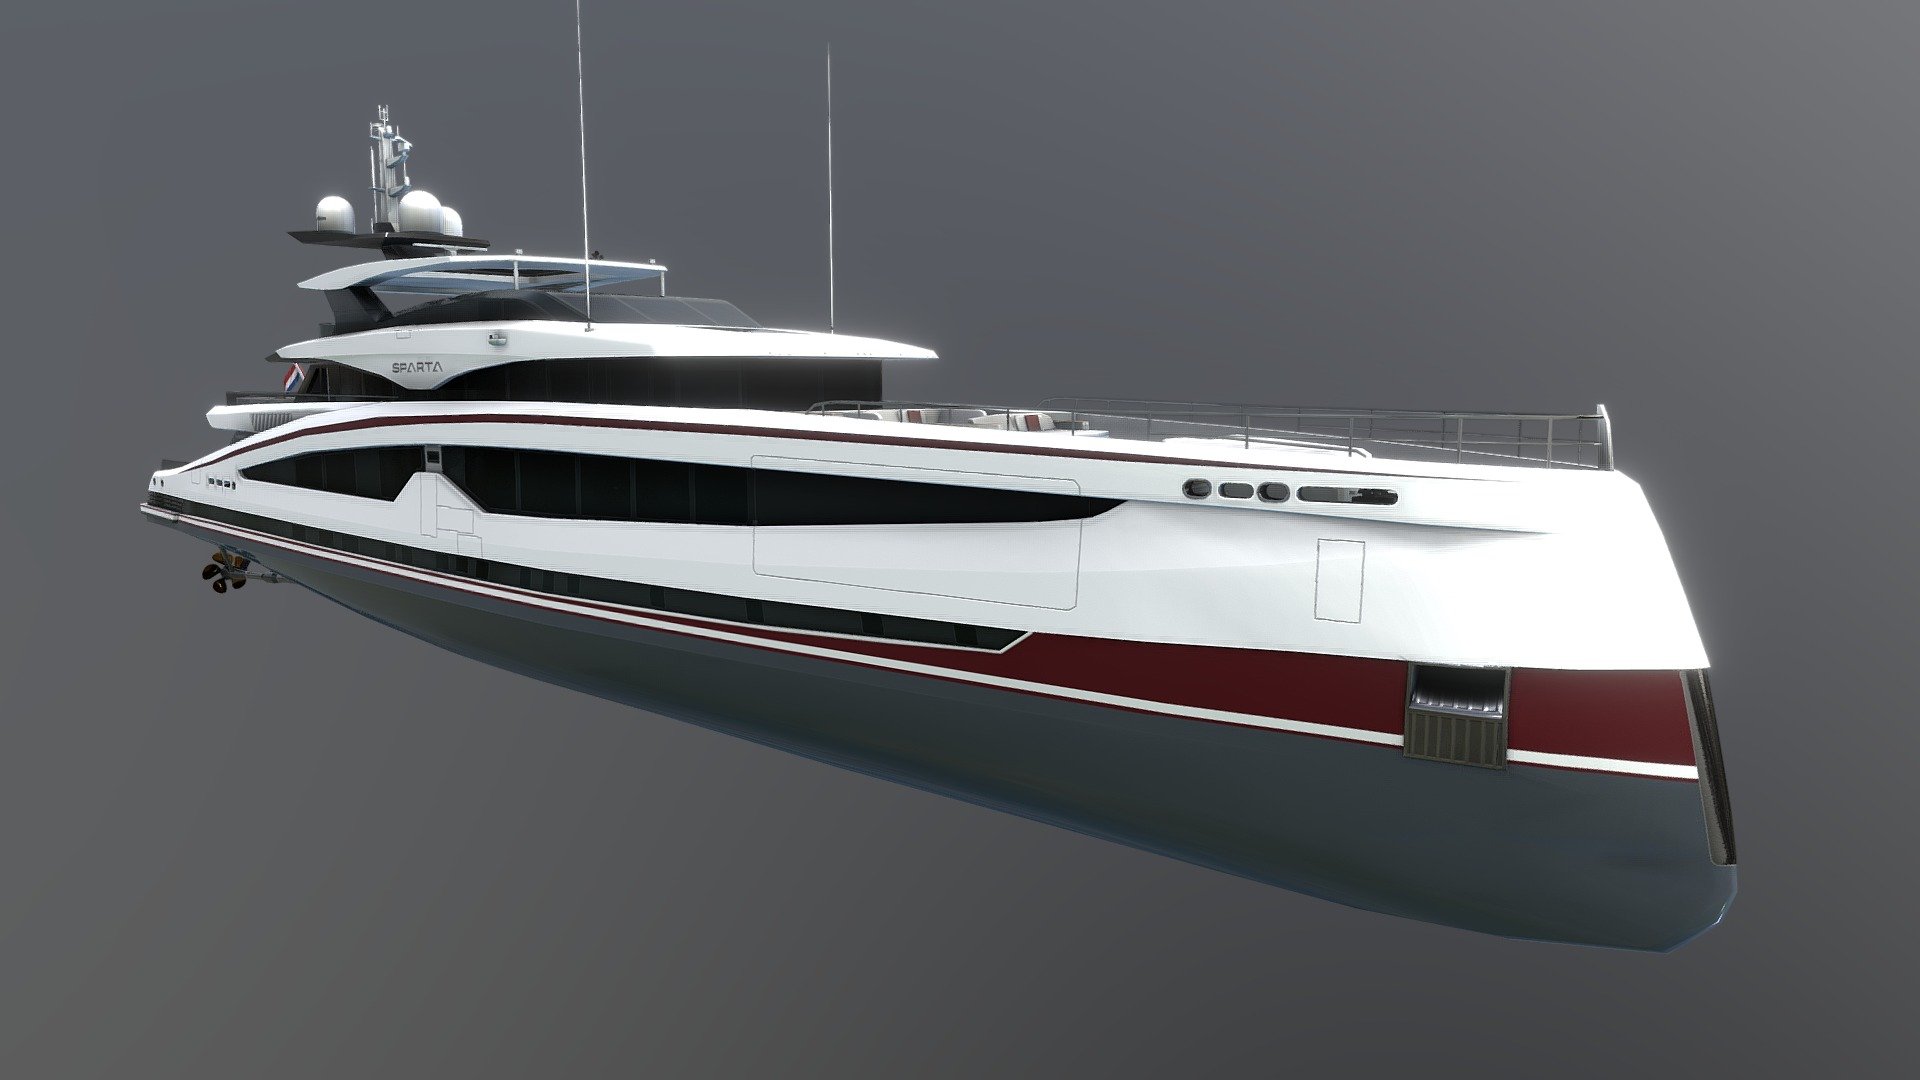 Made in Maya, Textured in Substance Painter - Sparta yacht - 3D model by Gingerbread (@aerialmace) 3d model